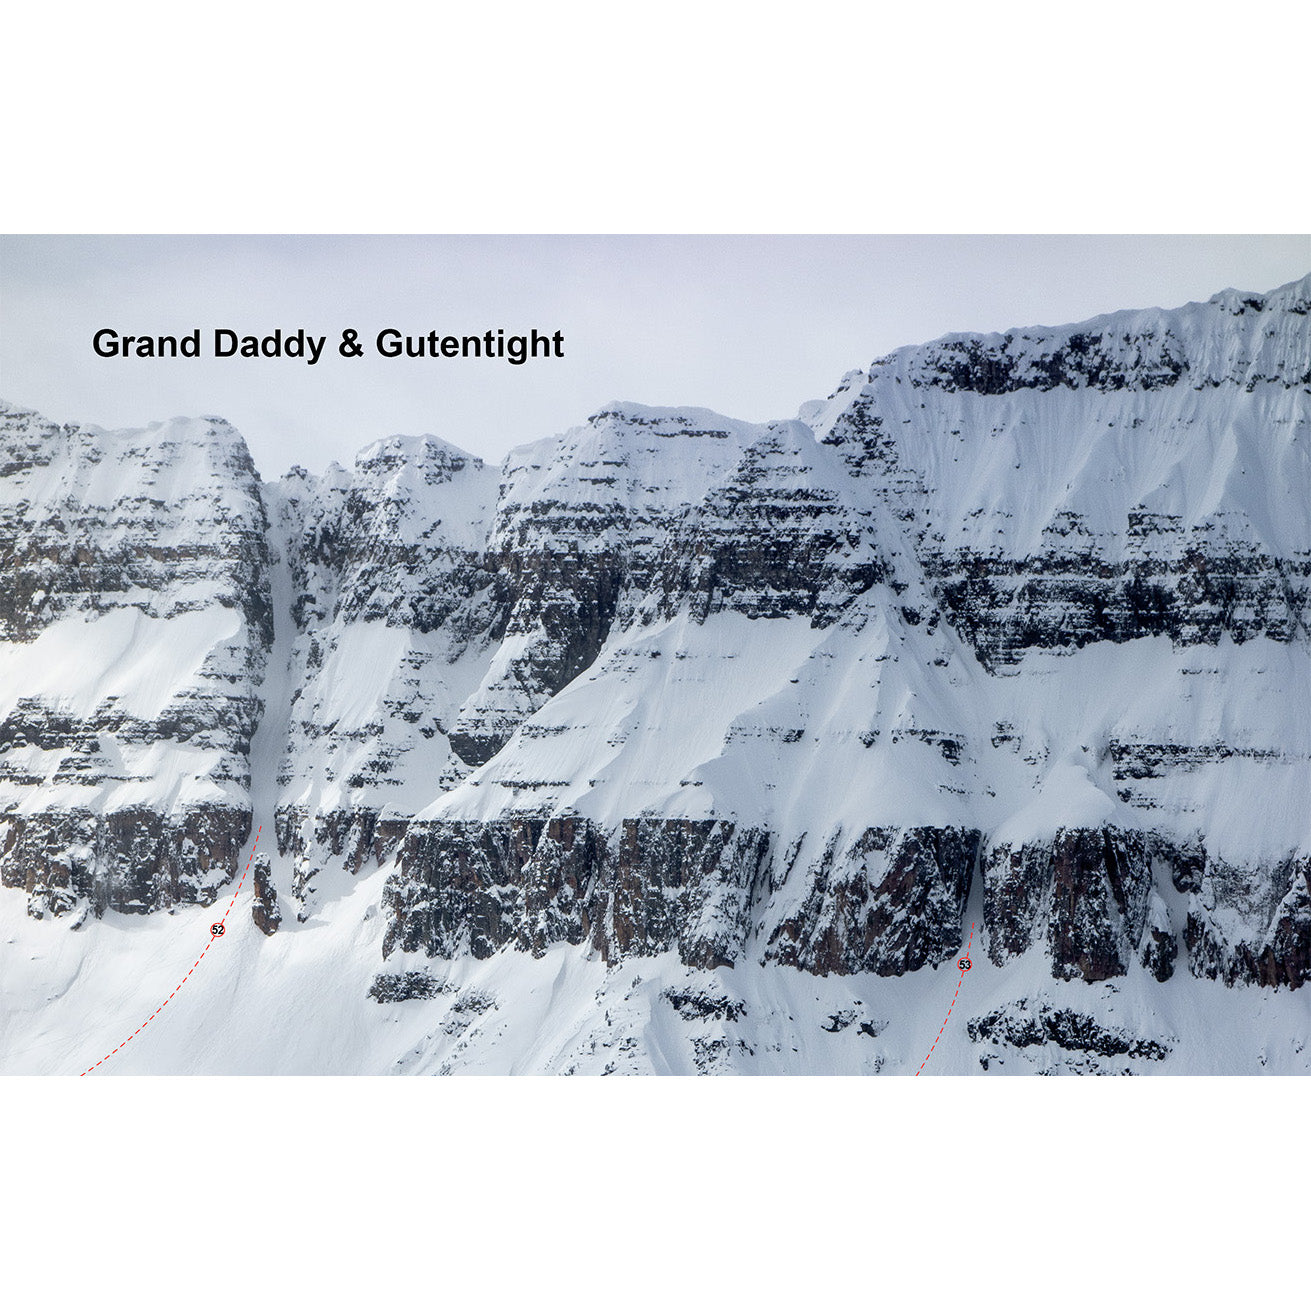 The Icefields Parkway Lake Louise to Bow Summit Confessions of a Ski Bum | Backcountry Books